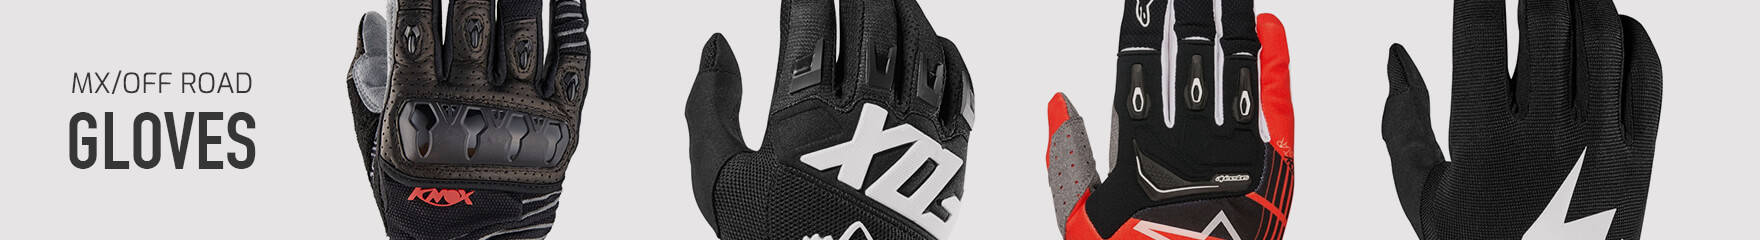 MX/Off Road Gloves